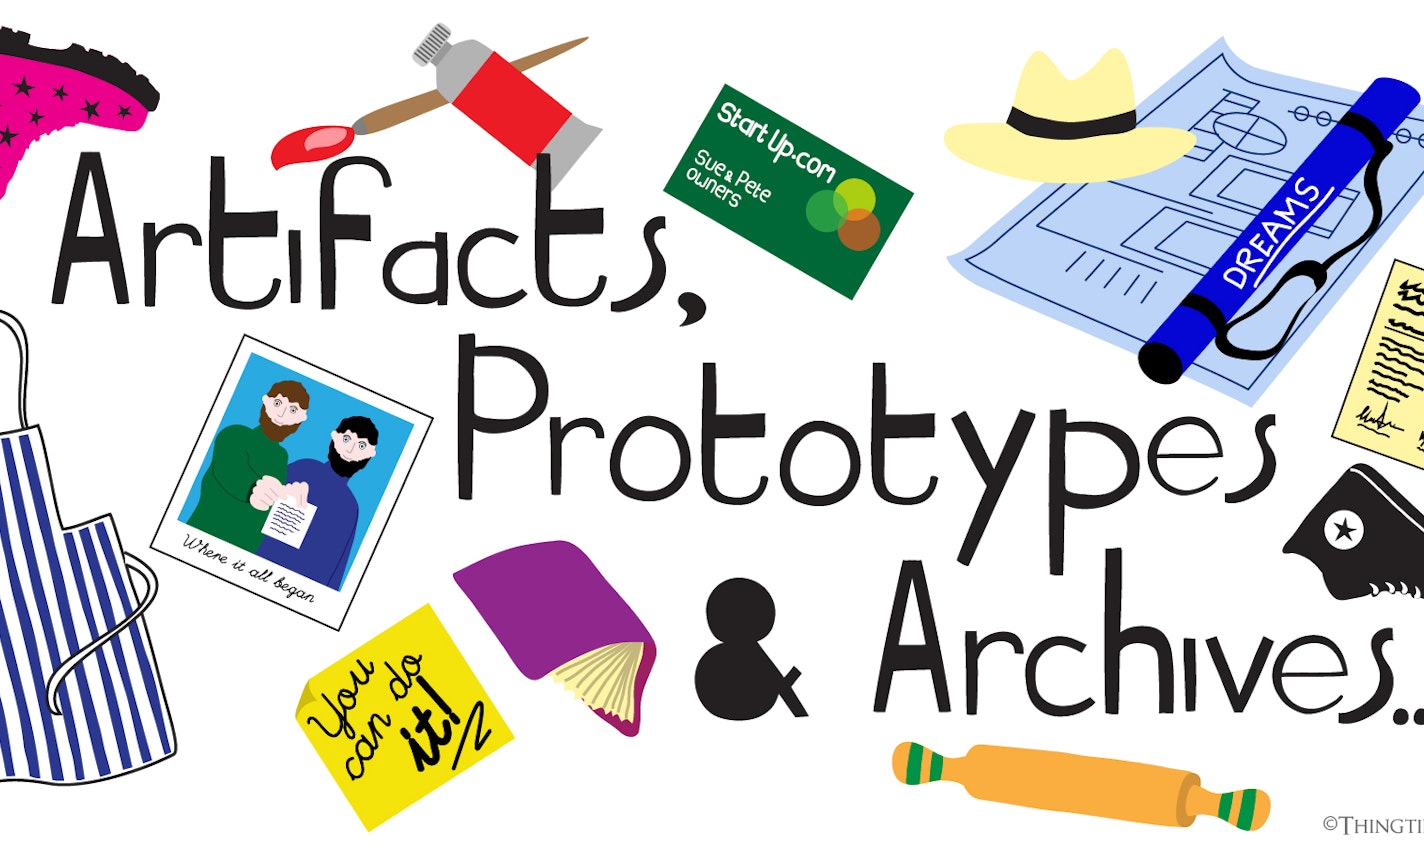 Show & Tale: Artifacts, Prototypes & Archives